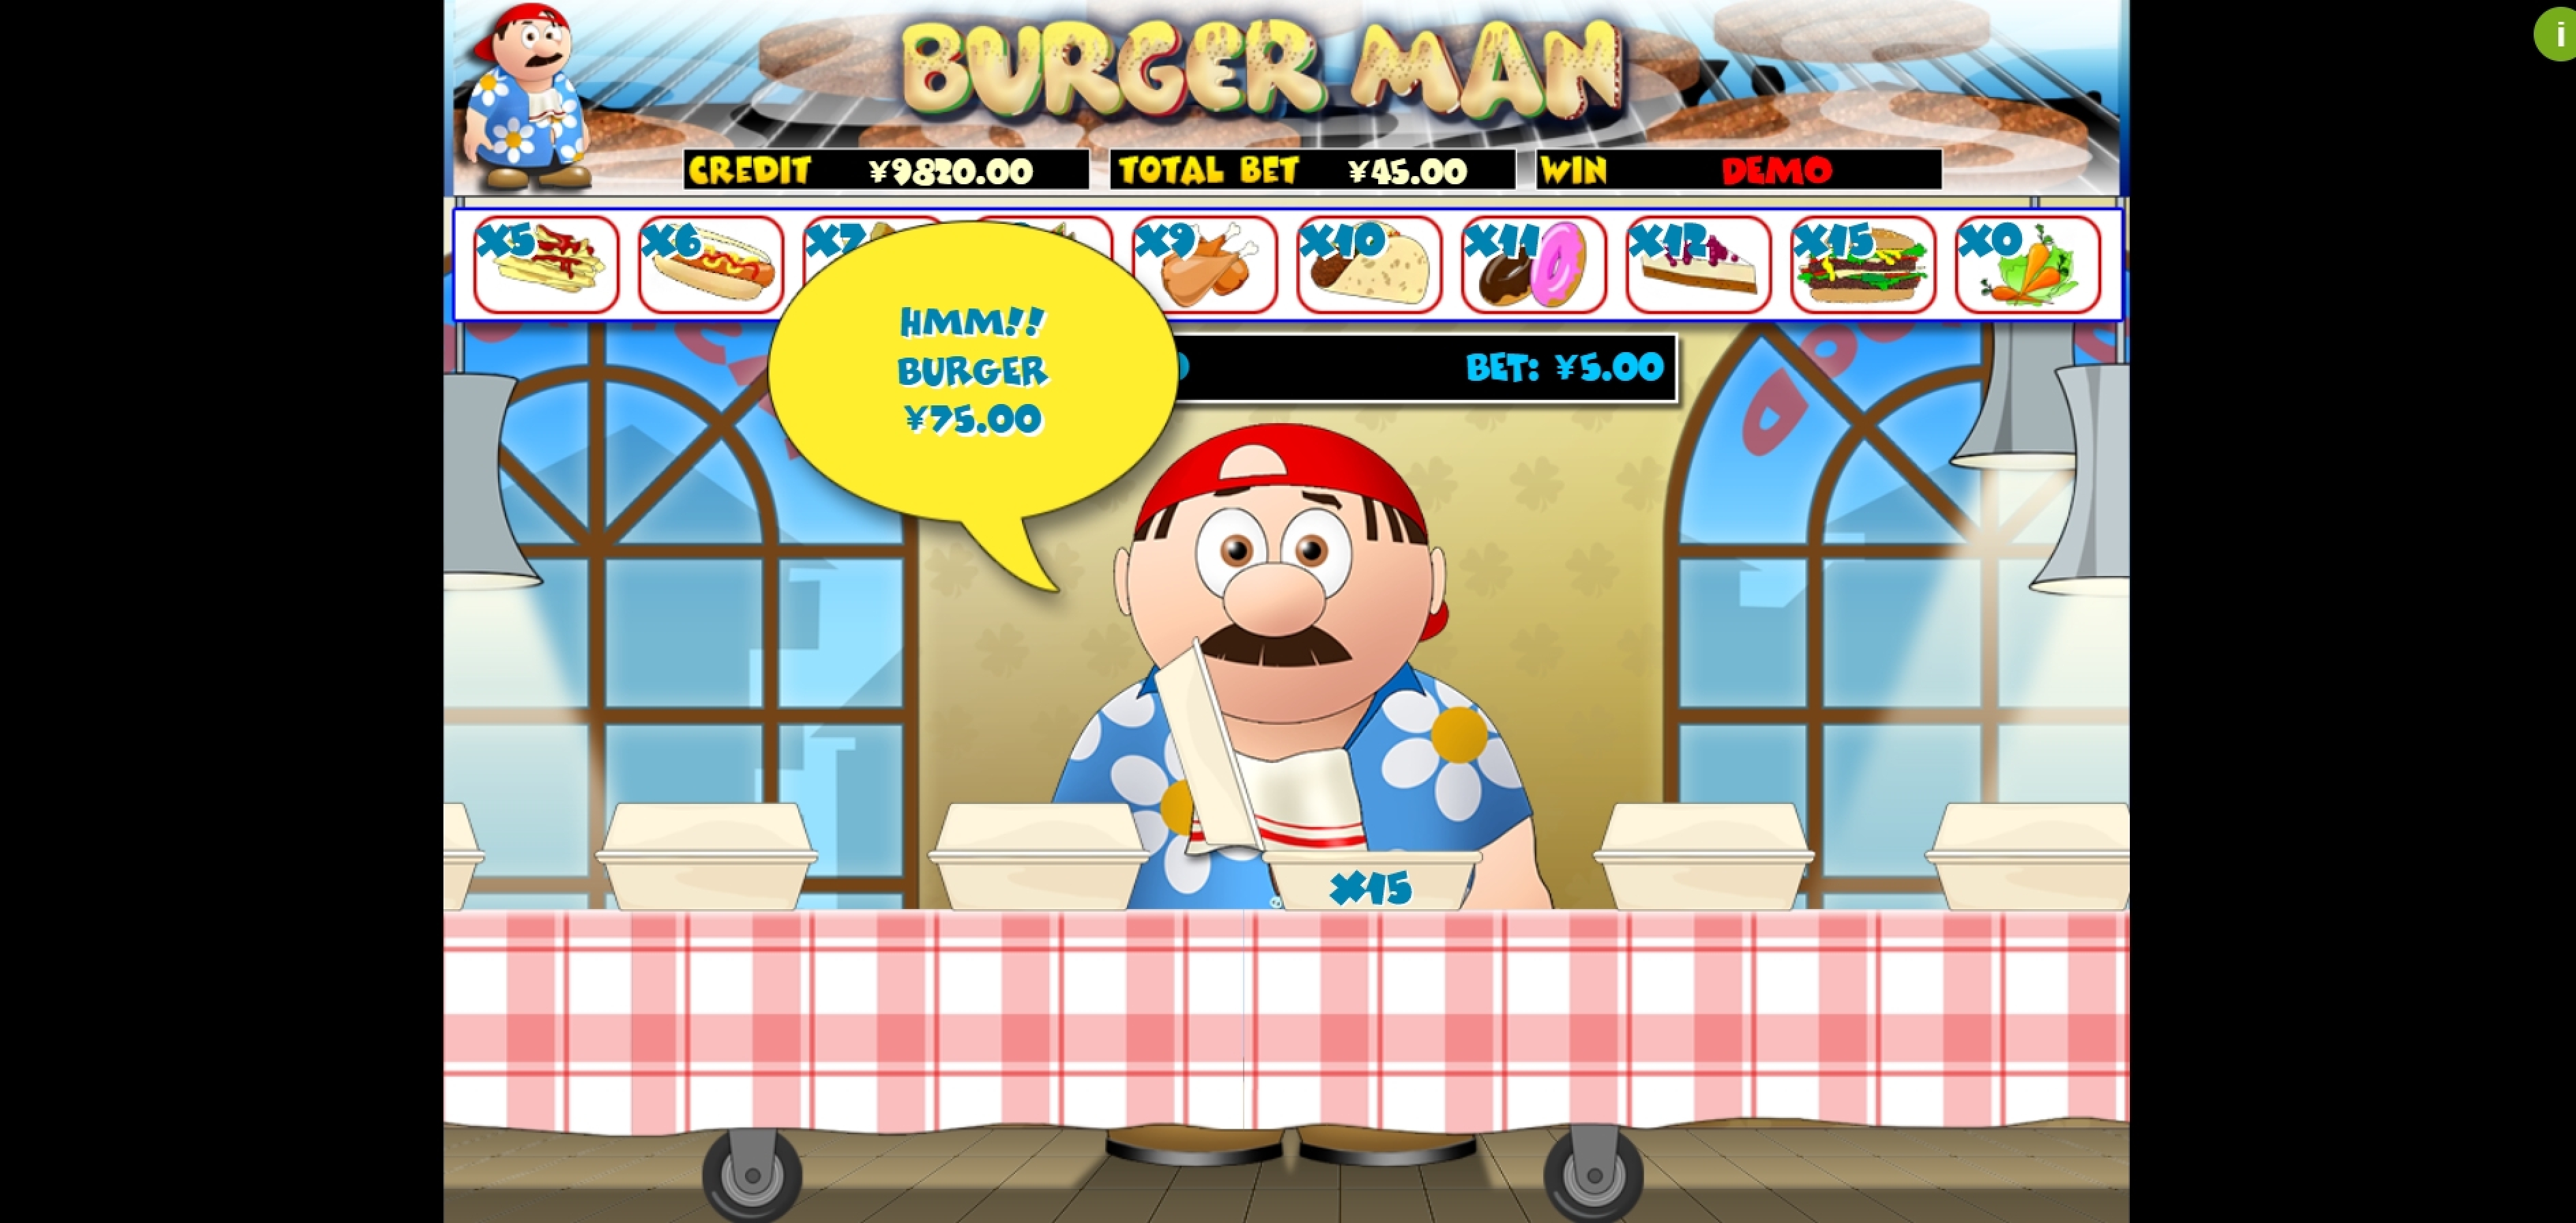 Win Money in Burgerman Free Slot Game by Slot Factory